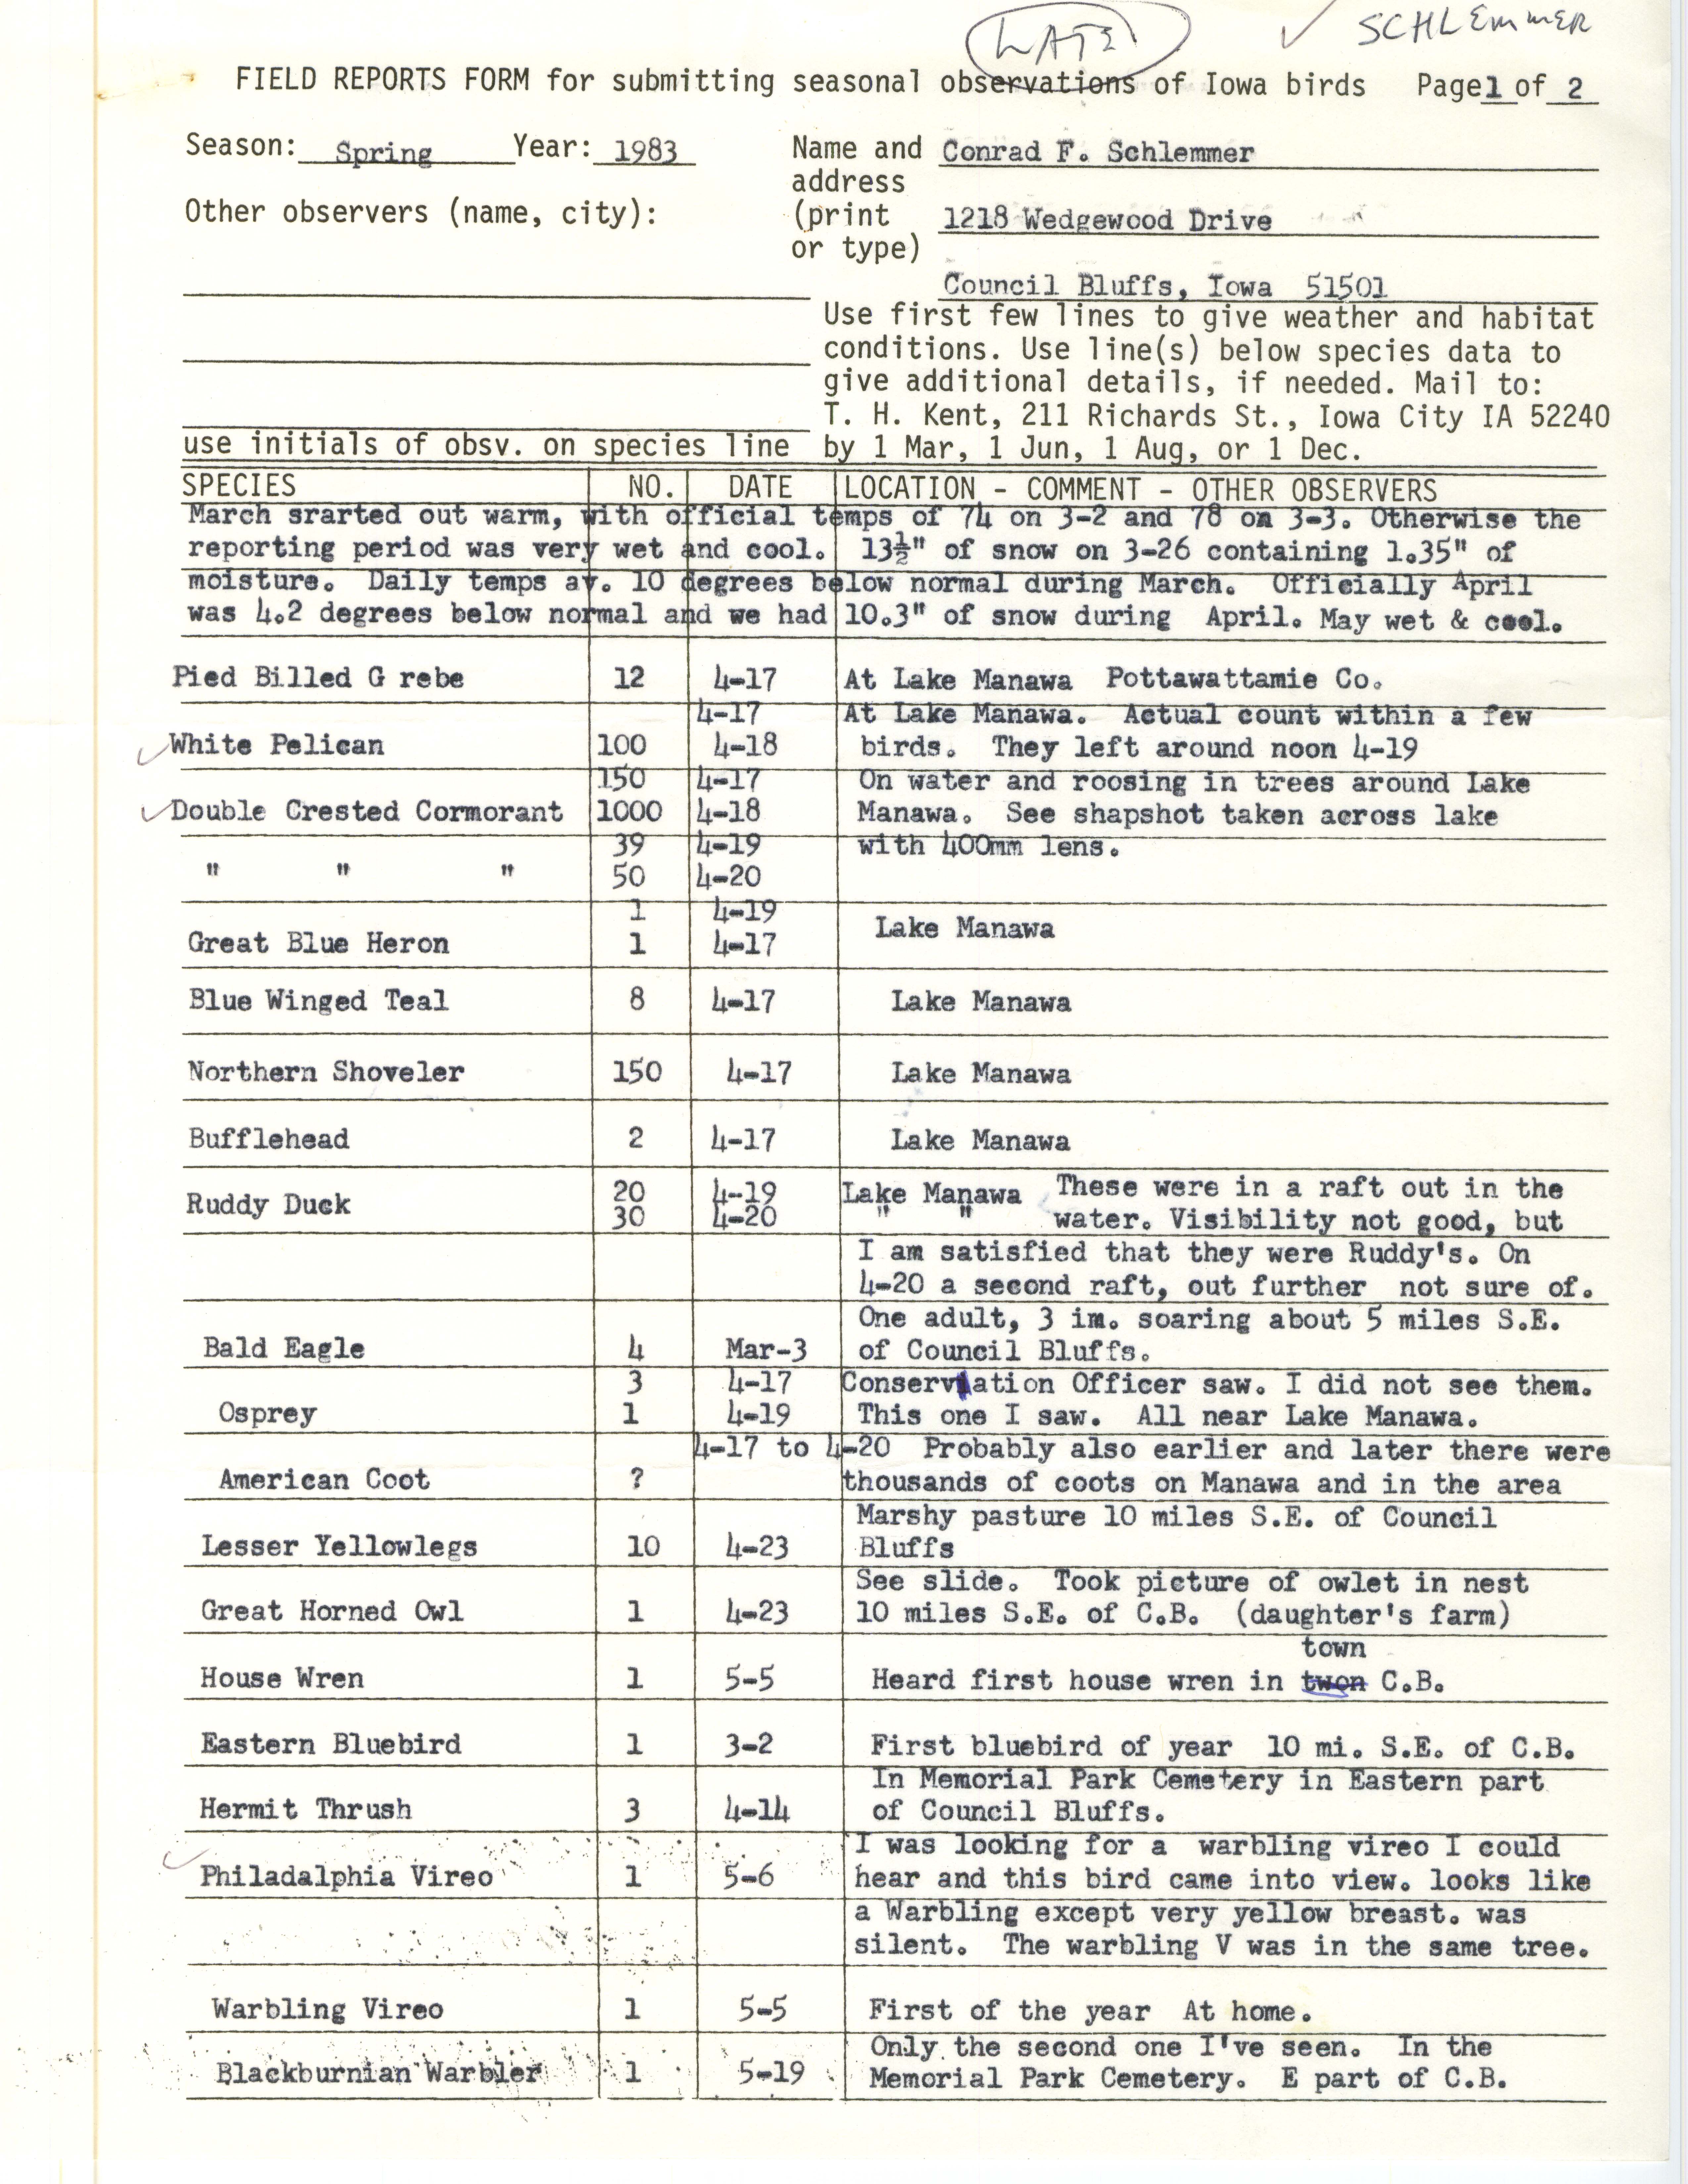 Field reports form for submitting seasonal observations of Iowa birds, Conrad F. Schlemmer, spring 1983